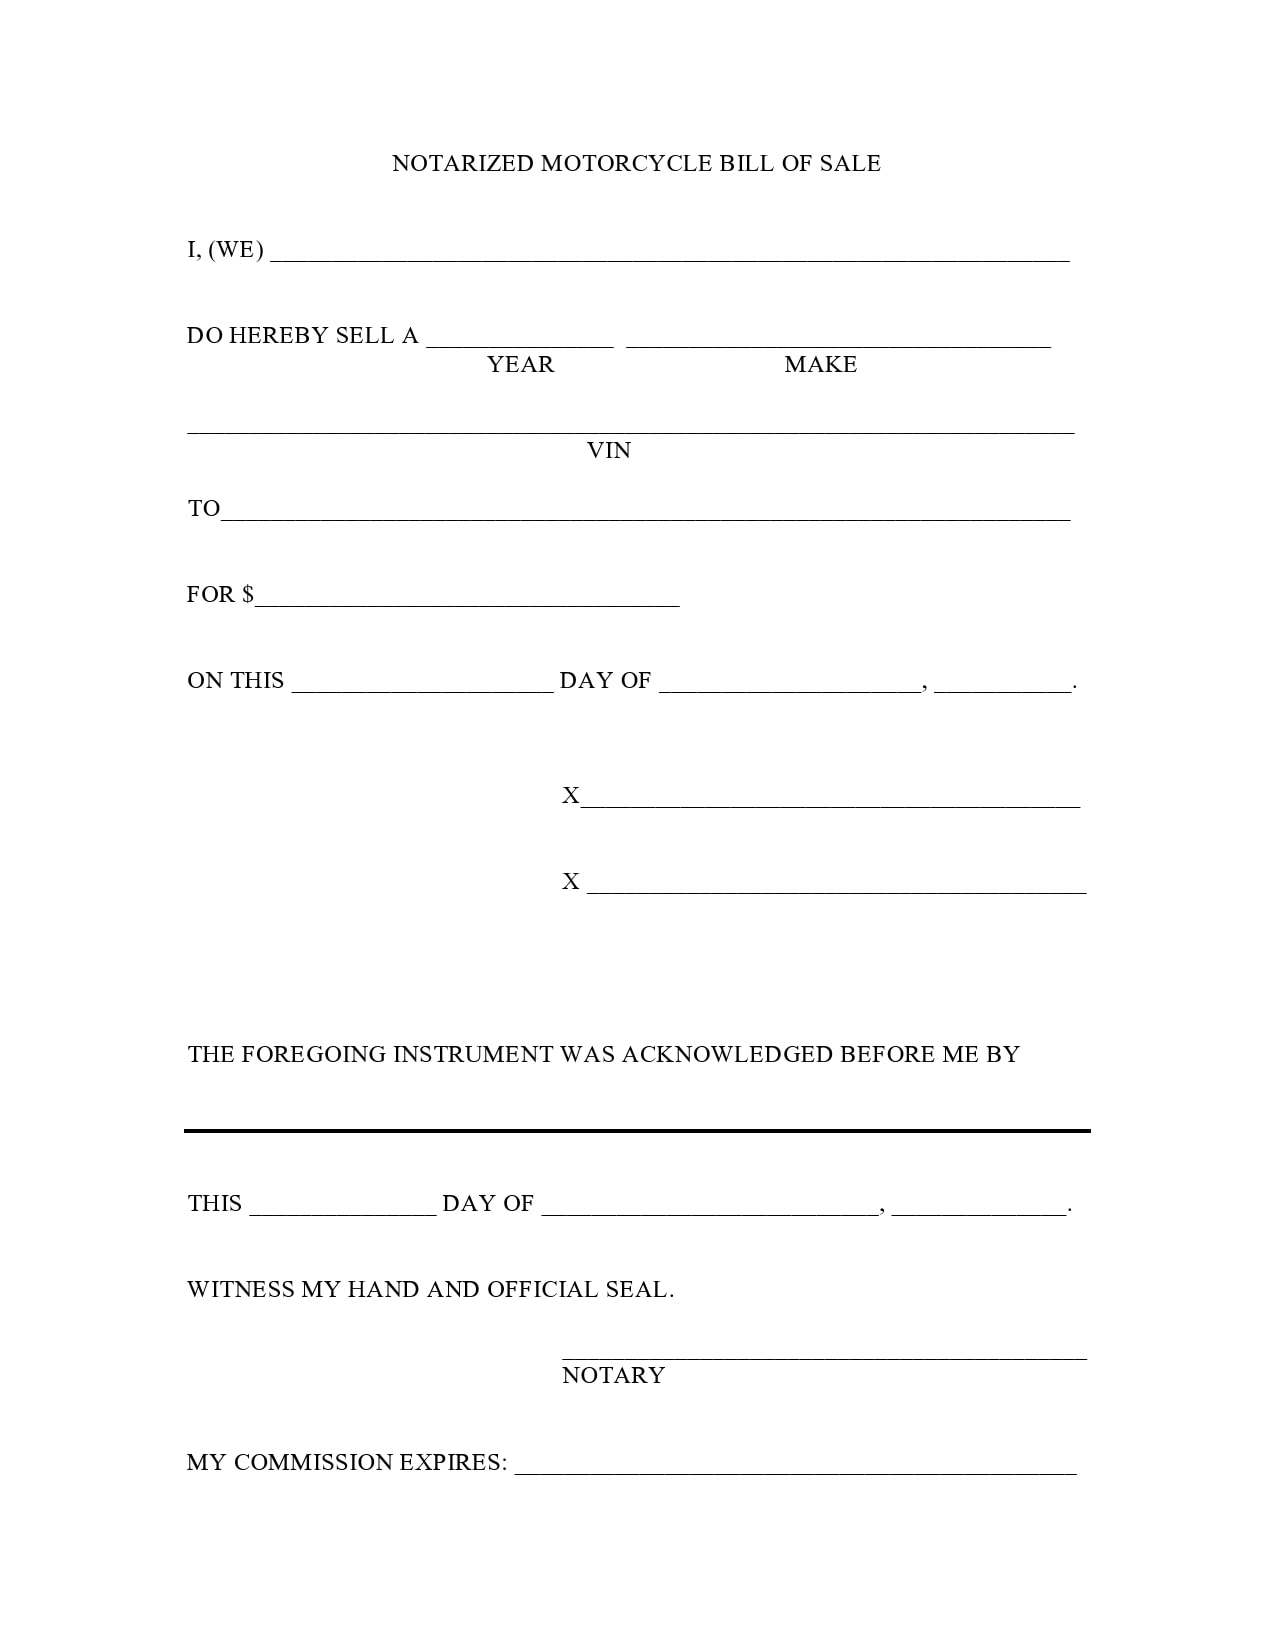 29 Printable Motorcycle Bill Of Sale Forms Free Templatearchive Motorcycle bill of sale illinois